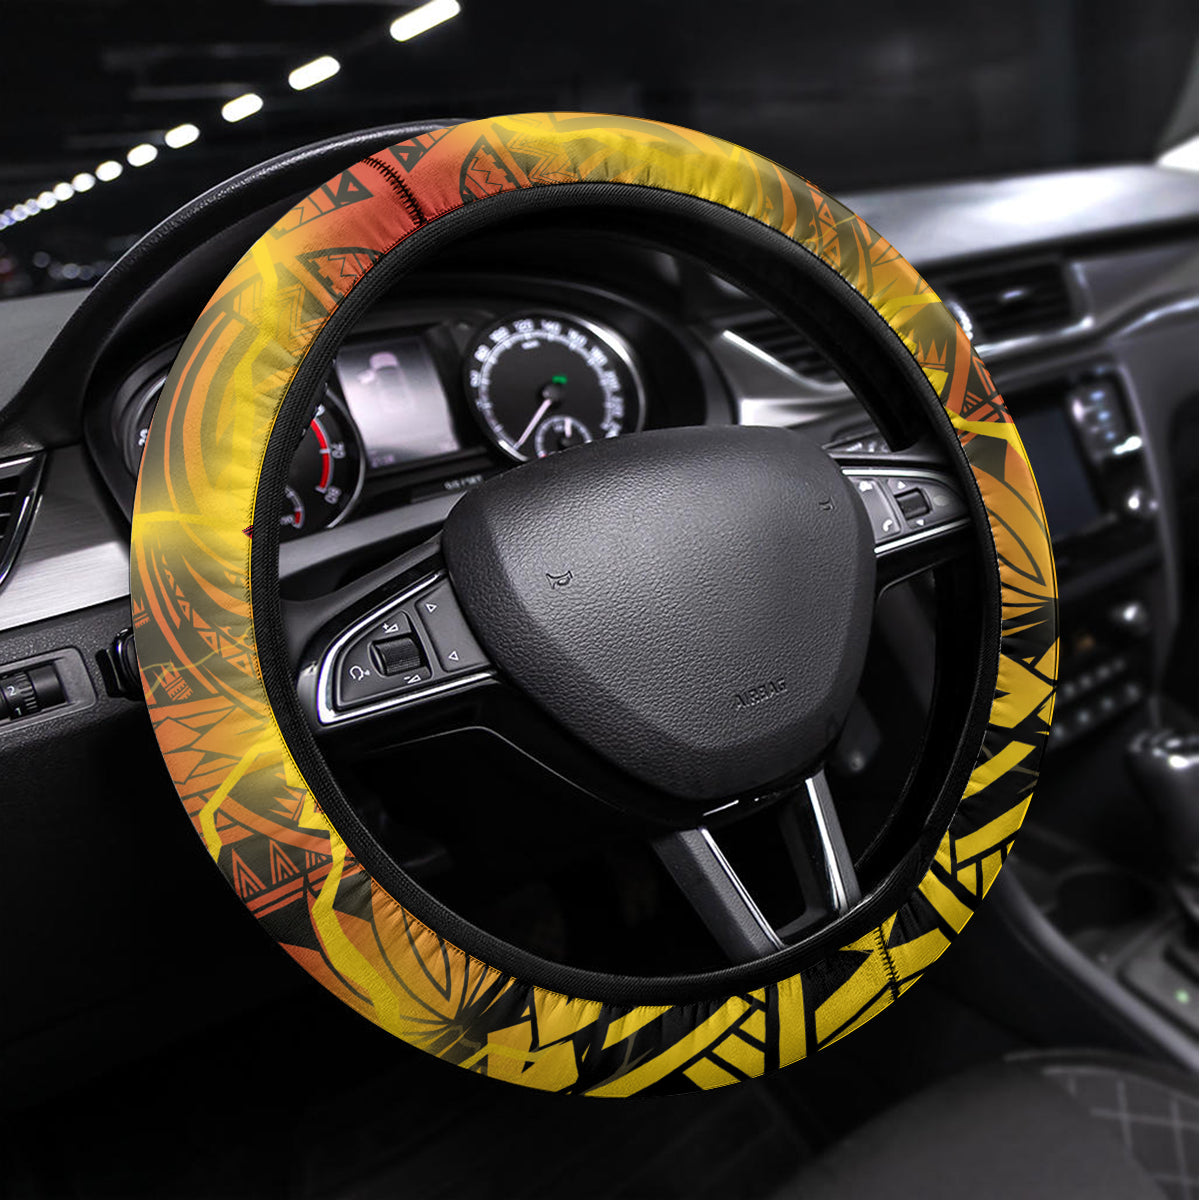 Papua New Guinea 49th Anniversary Steering Wheel Cover Bird of Paradise Unity In Diversity